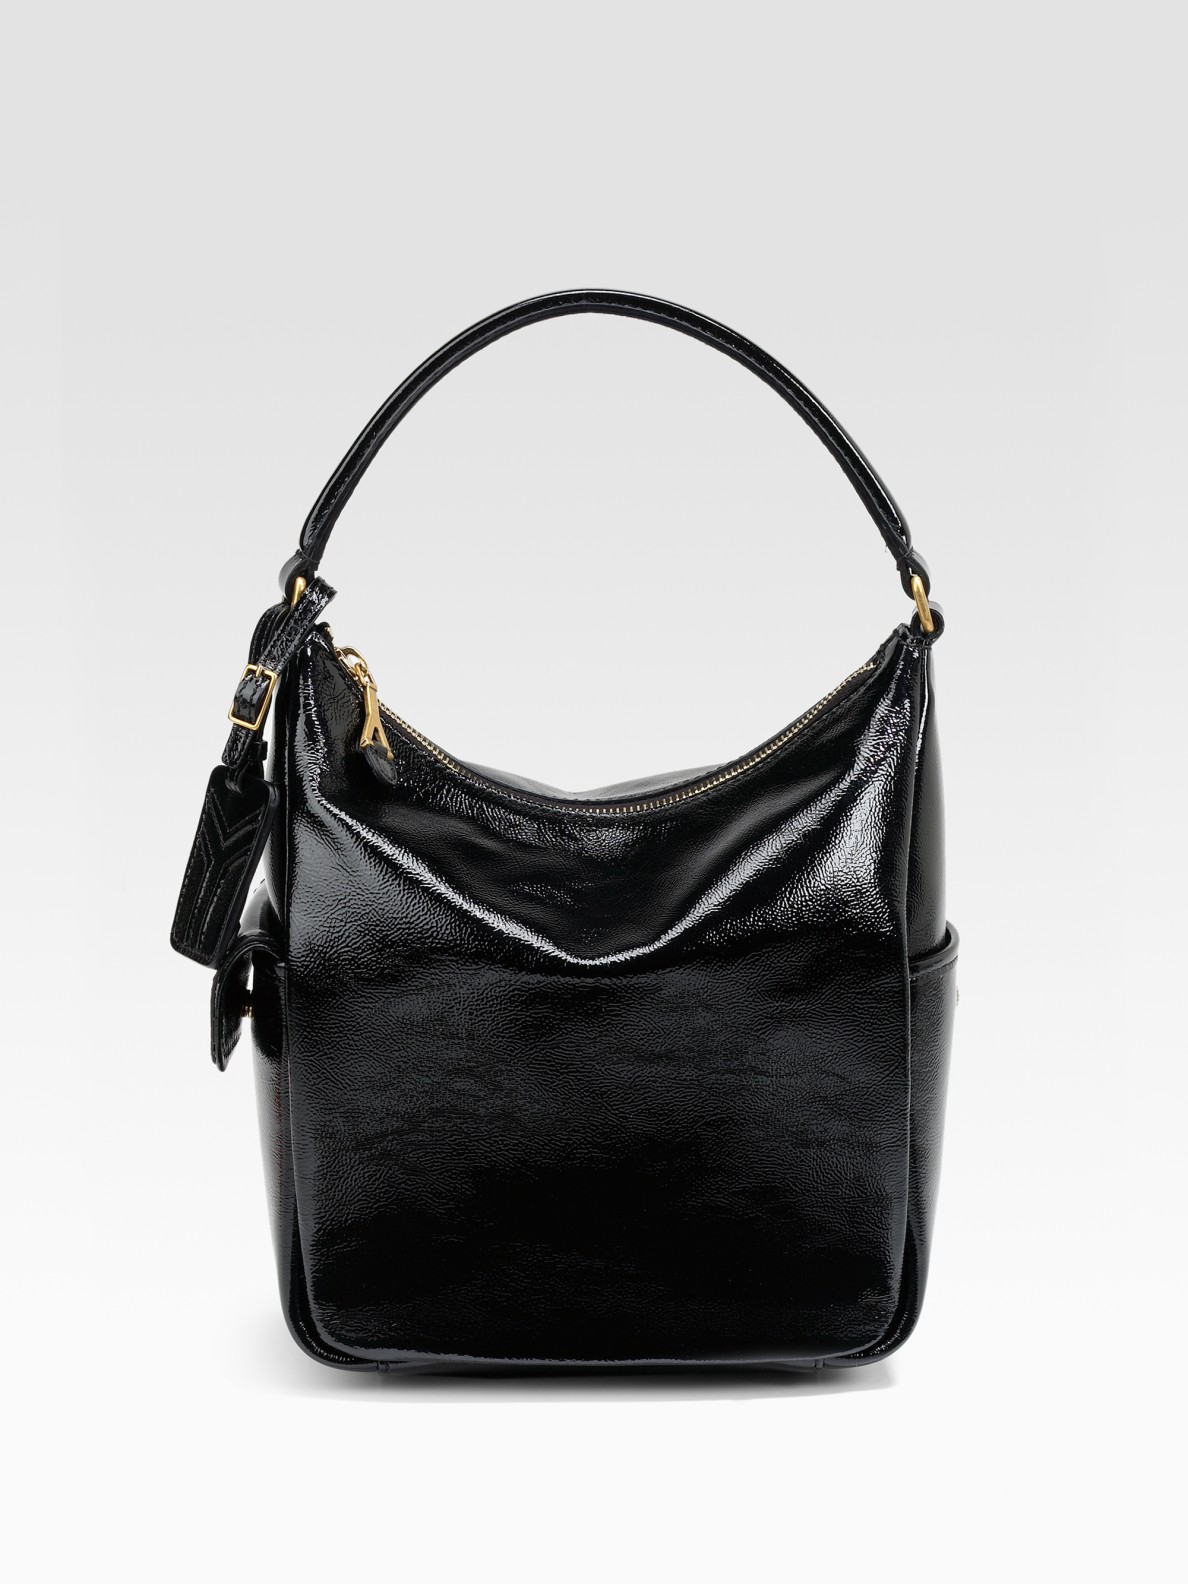 Saint laurent Multy Small Zipped Patent Leather Hobo in Black | Lyst